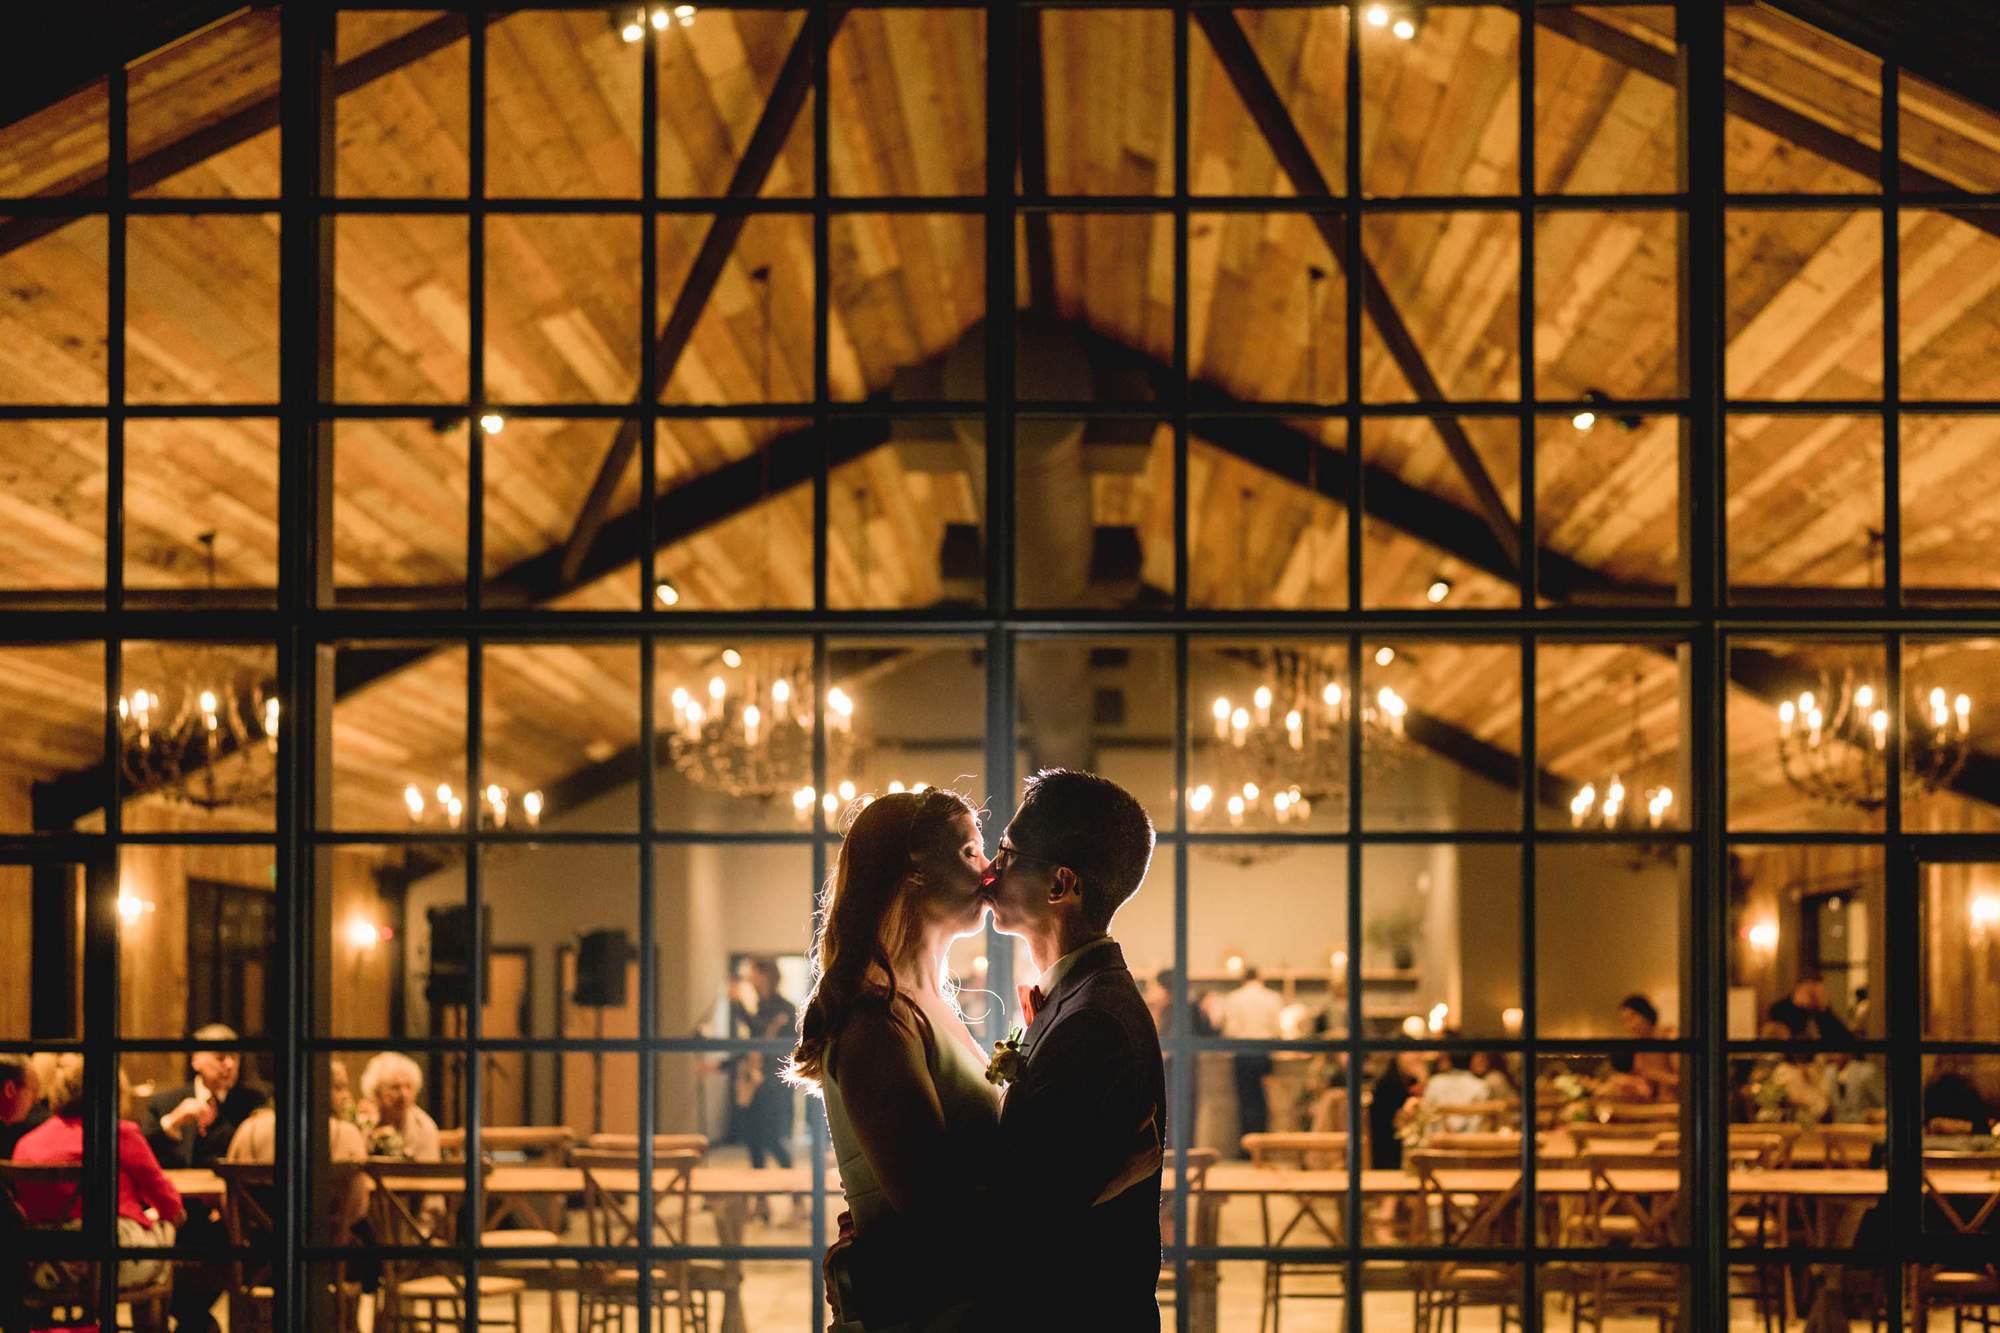 Bride and groom kiss at night time at the Botley Hill Barn wedding venue.